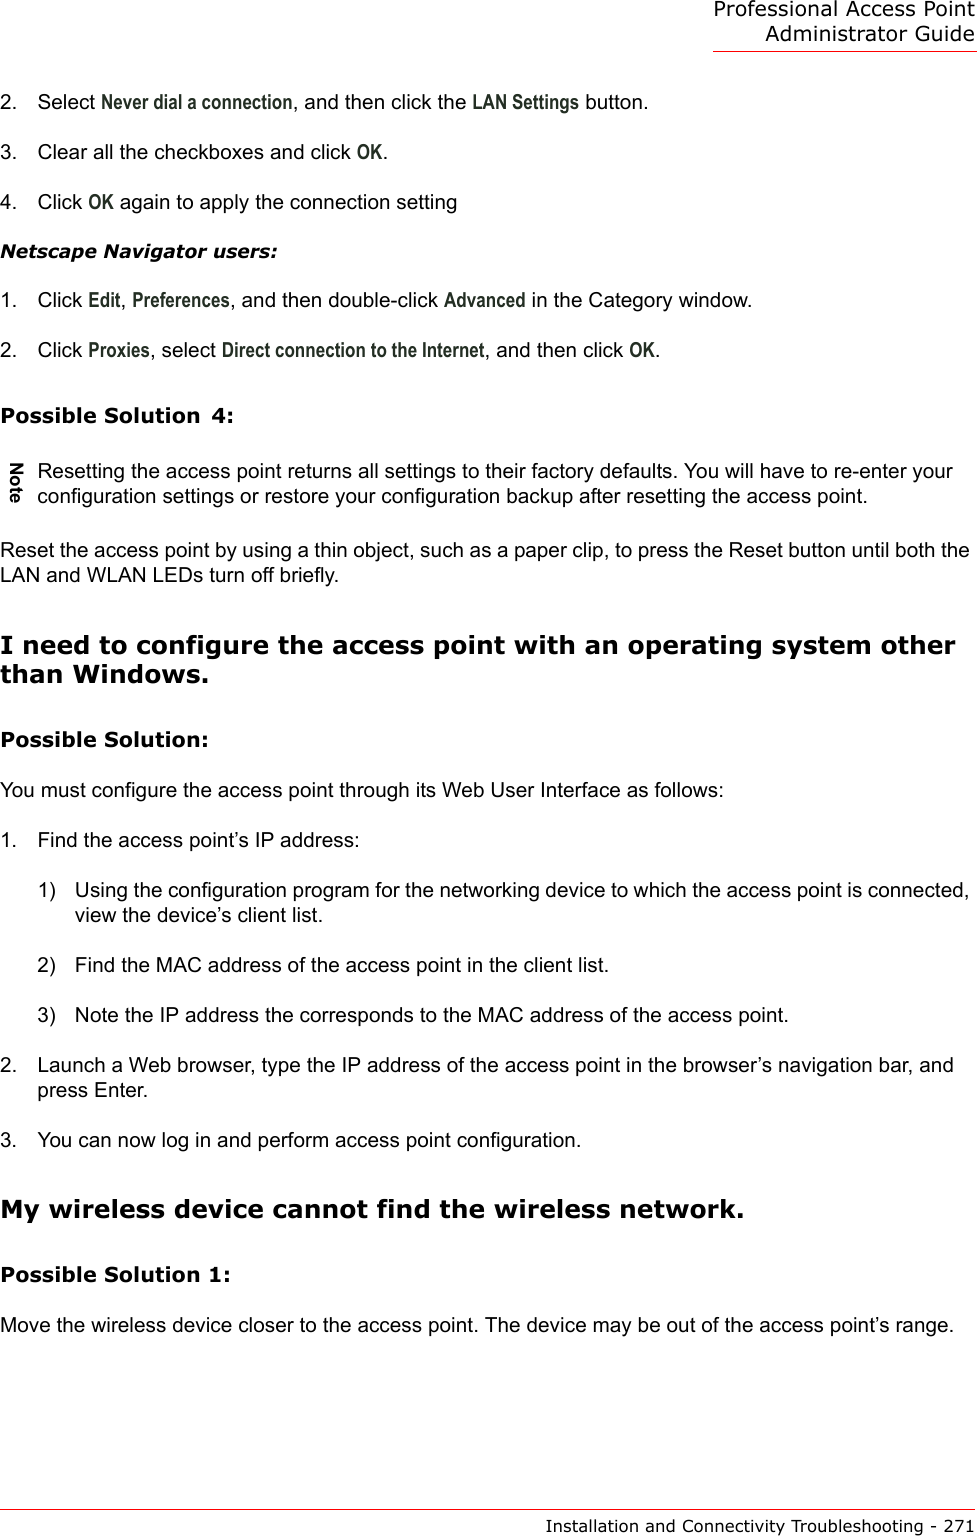 Professional Access Point Administrator GuideInstallation and Connectivity Troubleshooting - 2712. Select Never dial a connection, and then click the LAN Settings button.3. Clear all the checkboxes and click OK.4. Click OK again to apply the connection settingNetscape Navigator users: 1. Click Edit, Preferences, and then double-click Advanced in the Category window. 2. Click Proxies, select Direct connection to the Internet, and then click OK. Possible Solution  4:Reset the access point by using a thin object, such as a paper clip, to press the Reset button until both the LAN and WLAN LEDs turn off briefly.I need to configure the access point with an operating system other than Windows.Possible Solution:You must configure the access point through its Web User Interface as follows:1. Find the access point’s IP address:1) Using the configuration program for the networking device to which the access point is connected, view the device’s client list.2) Find the MAC address of the access point in the client list.3) Note the IP address the corresponds to the MAC address of the access point.2. Launch a Web browser, type the IP address of the access point in the browser’s navigation bar, and press Enter.3. You can now log in and perform access point configuration.My wireless device cannot find the wireless network.Possible Solution 1: Move the wireless device closer to the access point. The device may be out of the access point’s range.NoteResetting the access point returns all settings to their factory defaults. You will have to re-enter your configuration settings or restore your configuration backup after resetting the access point. 